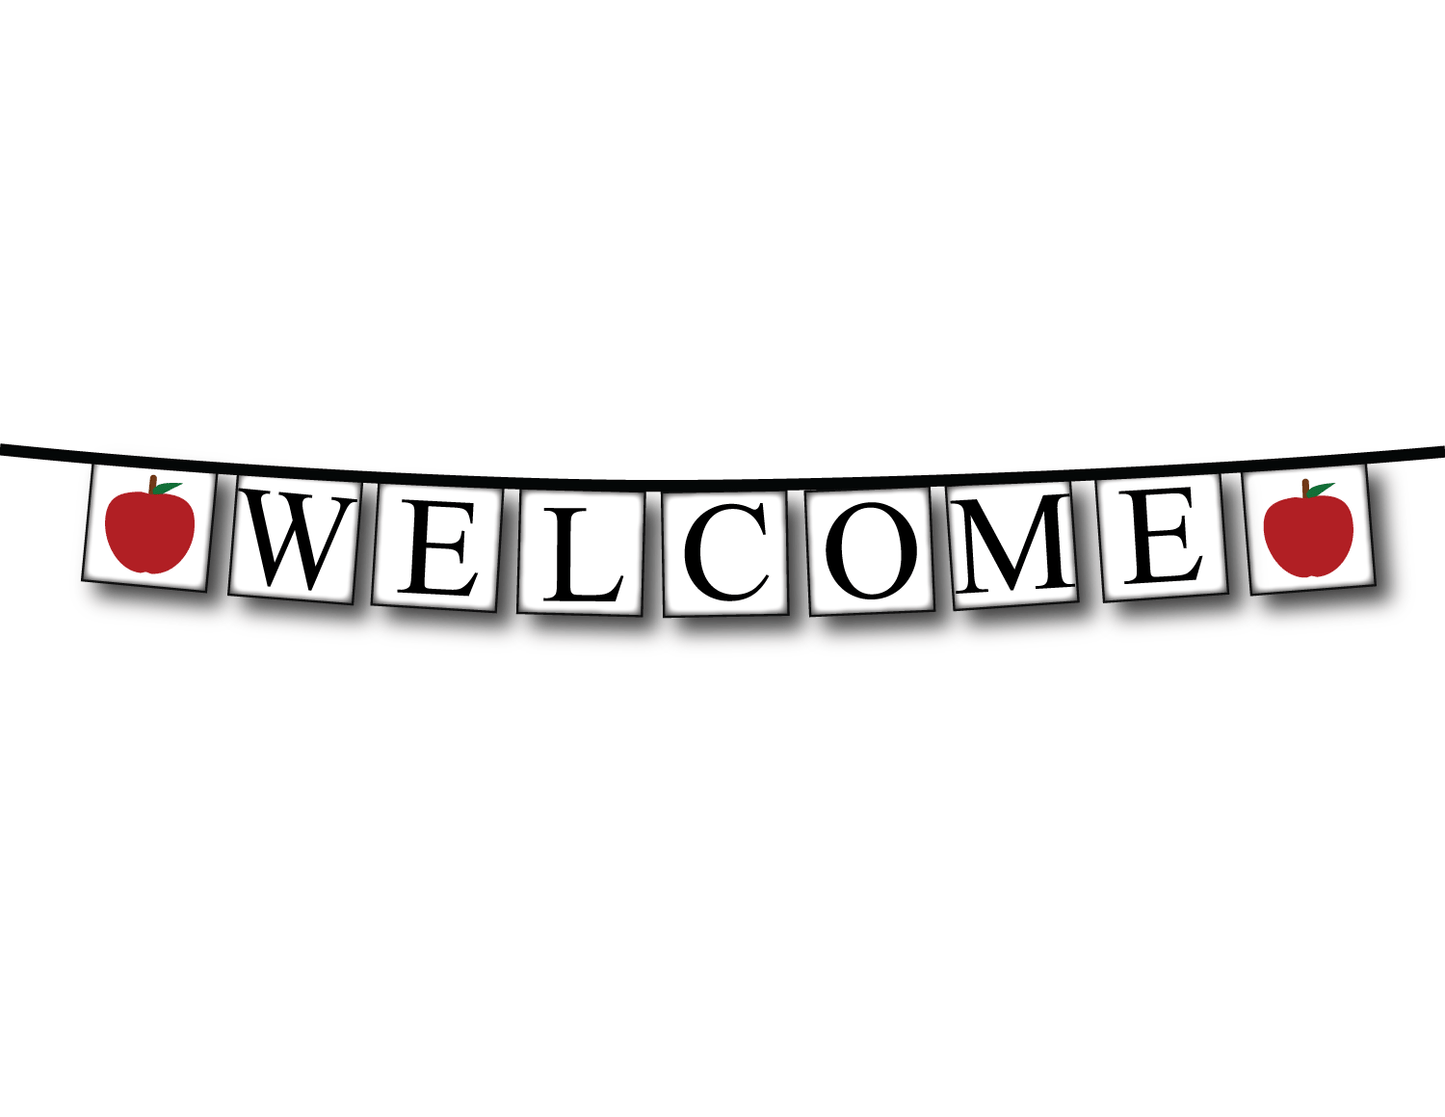 printable welcome banner with apples for the teacher - Celebrating Together